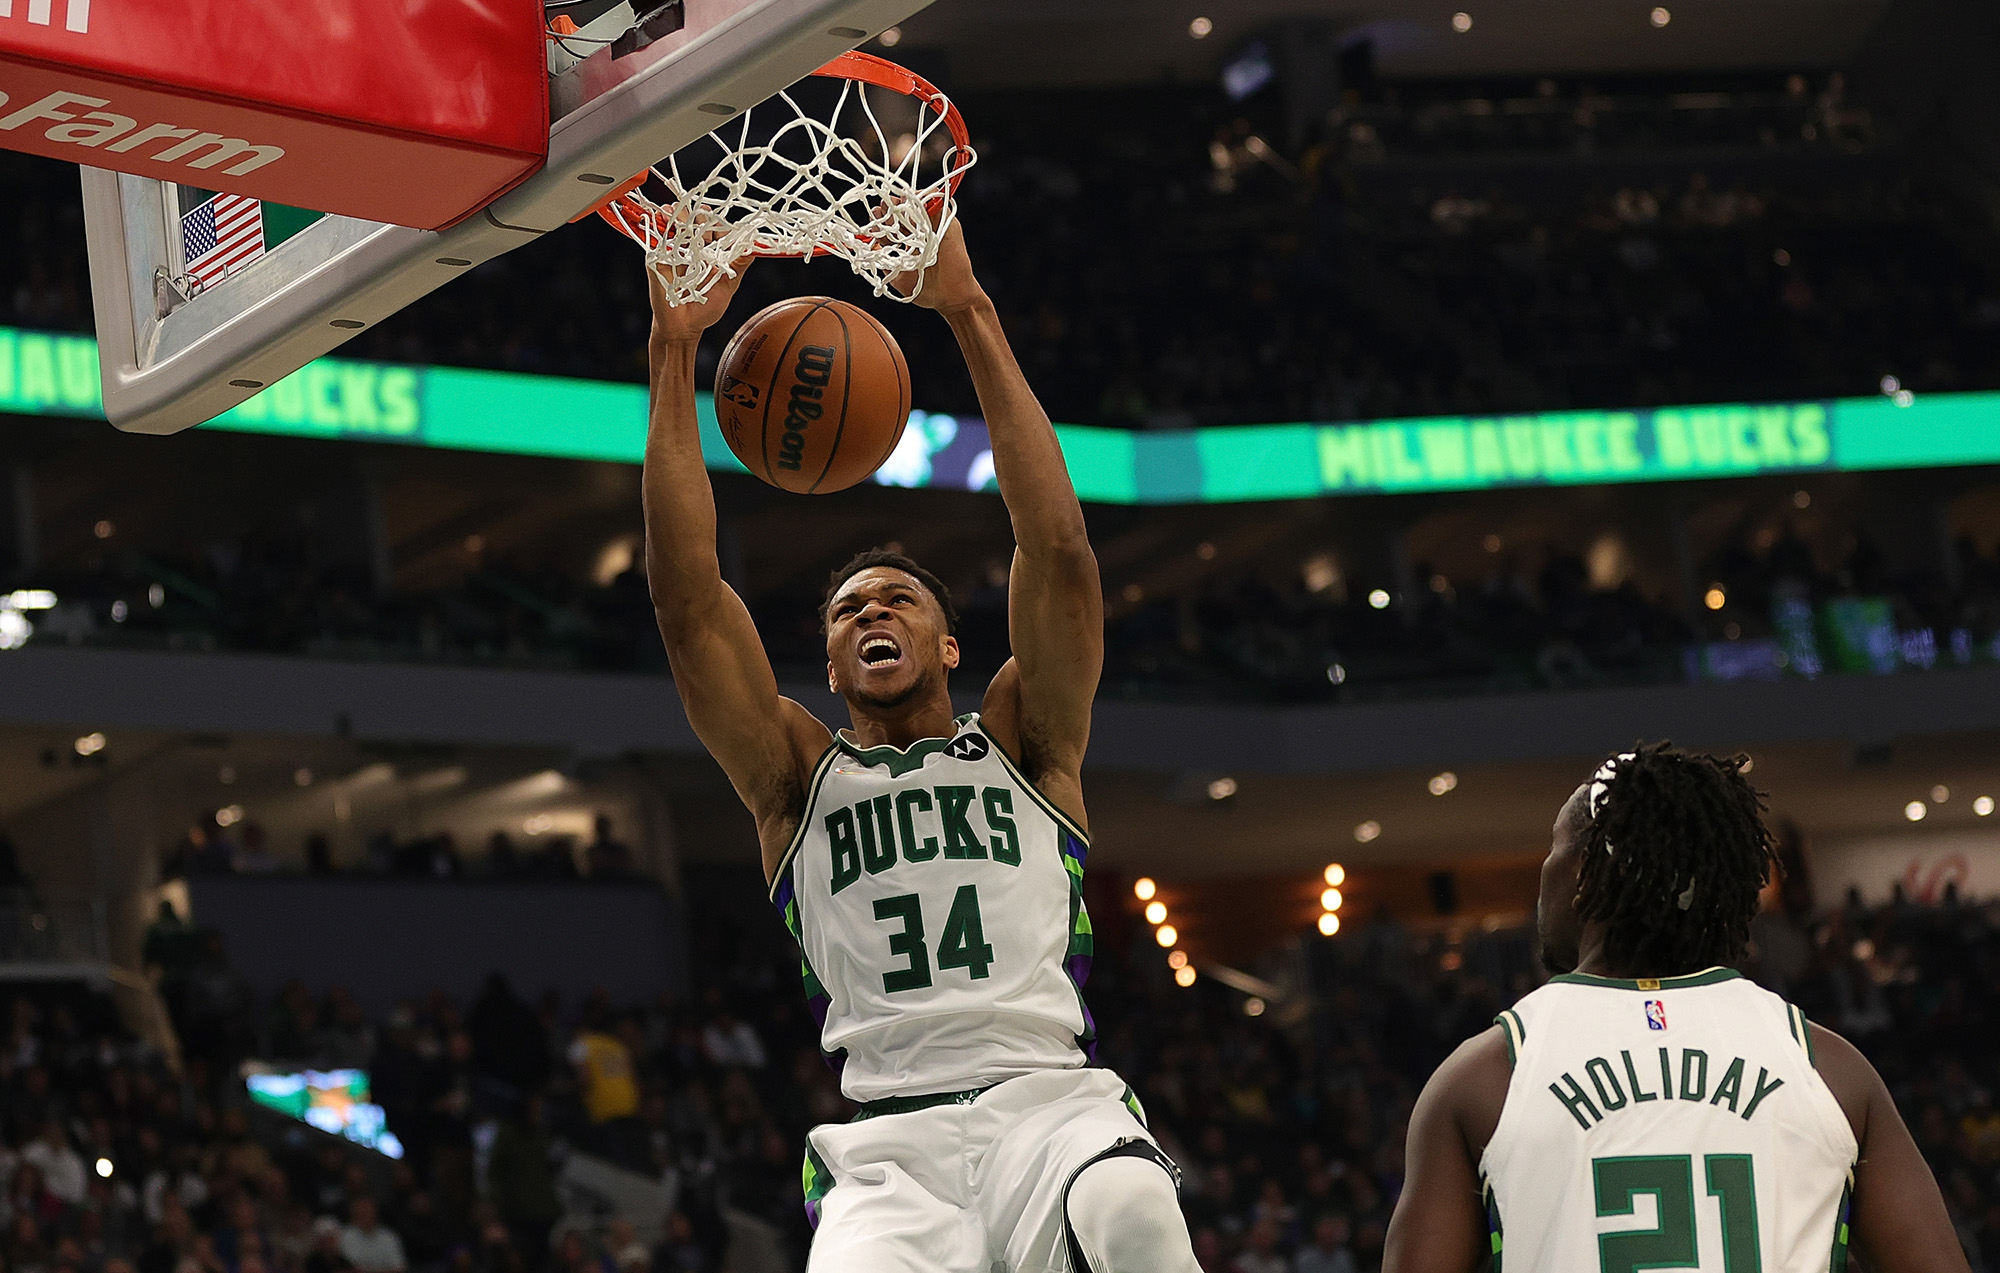 Bucks: Watch Out NBA, Giannis Antetokounmpo is Fully Healthy Again